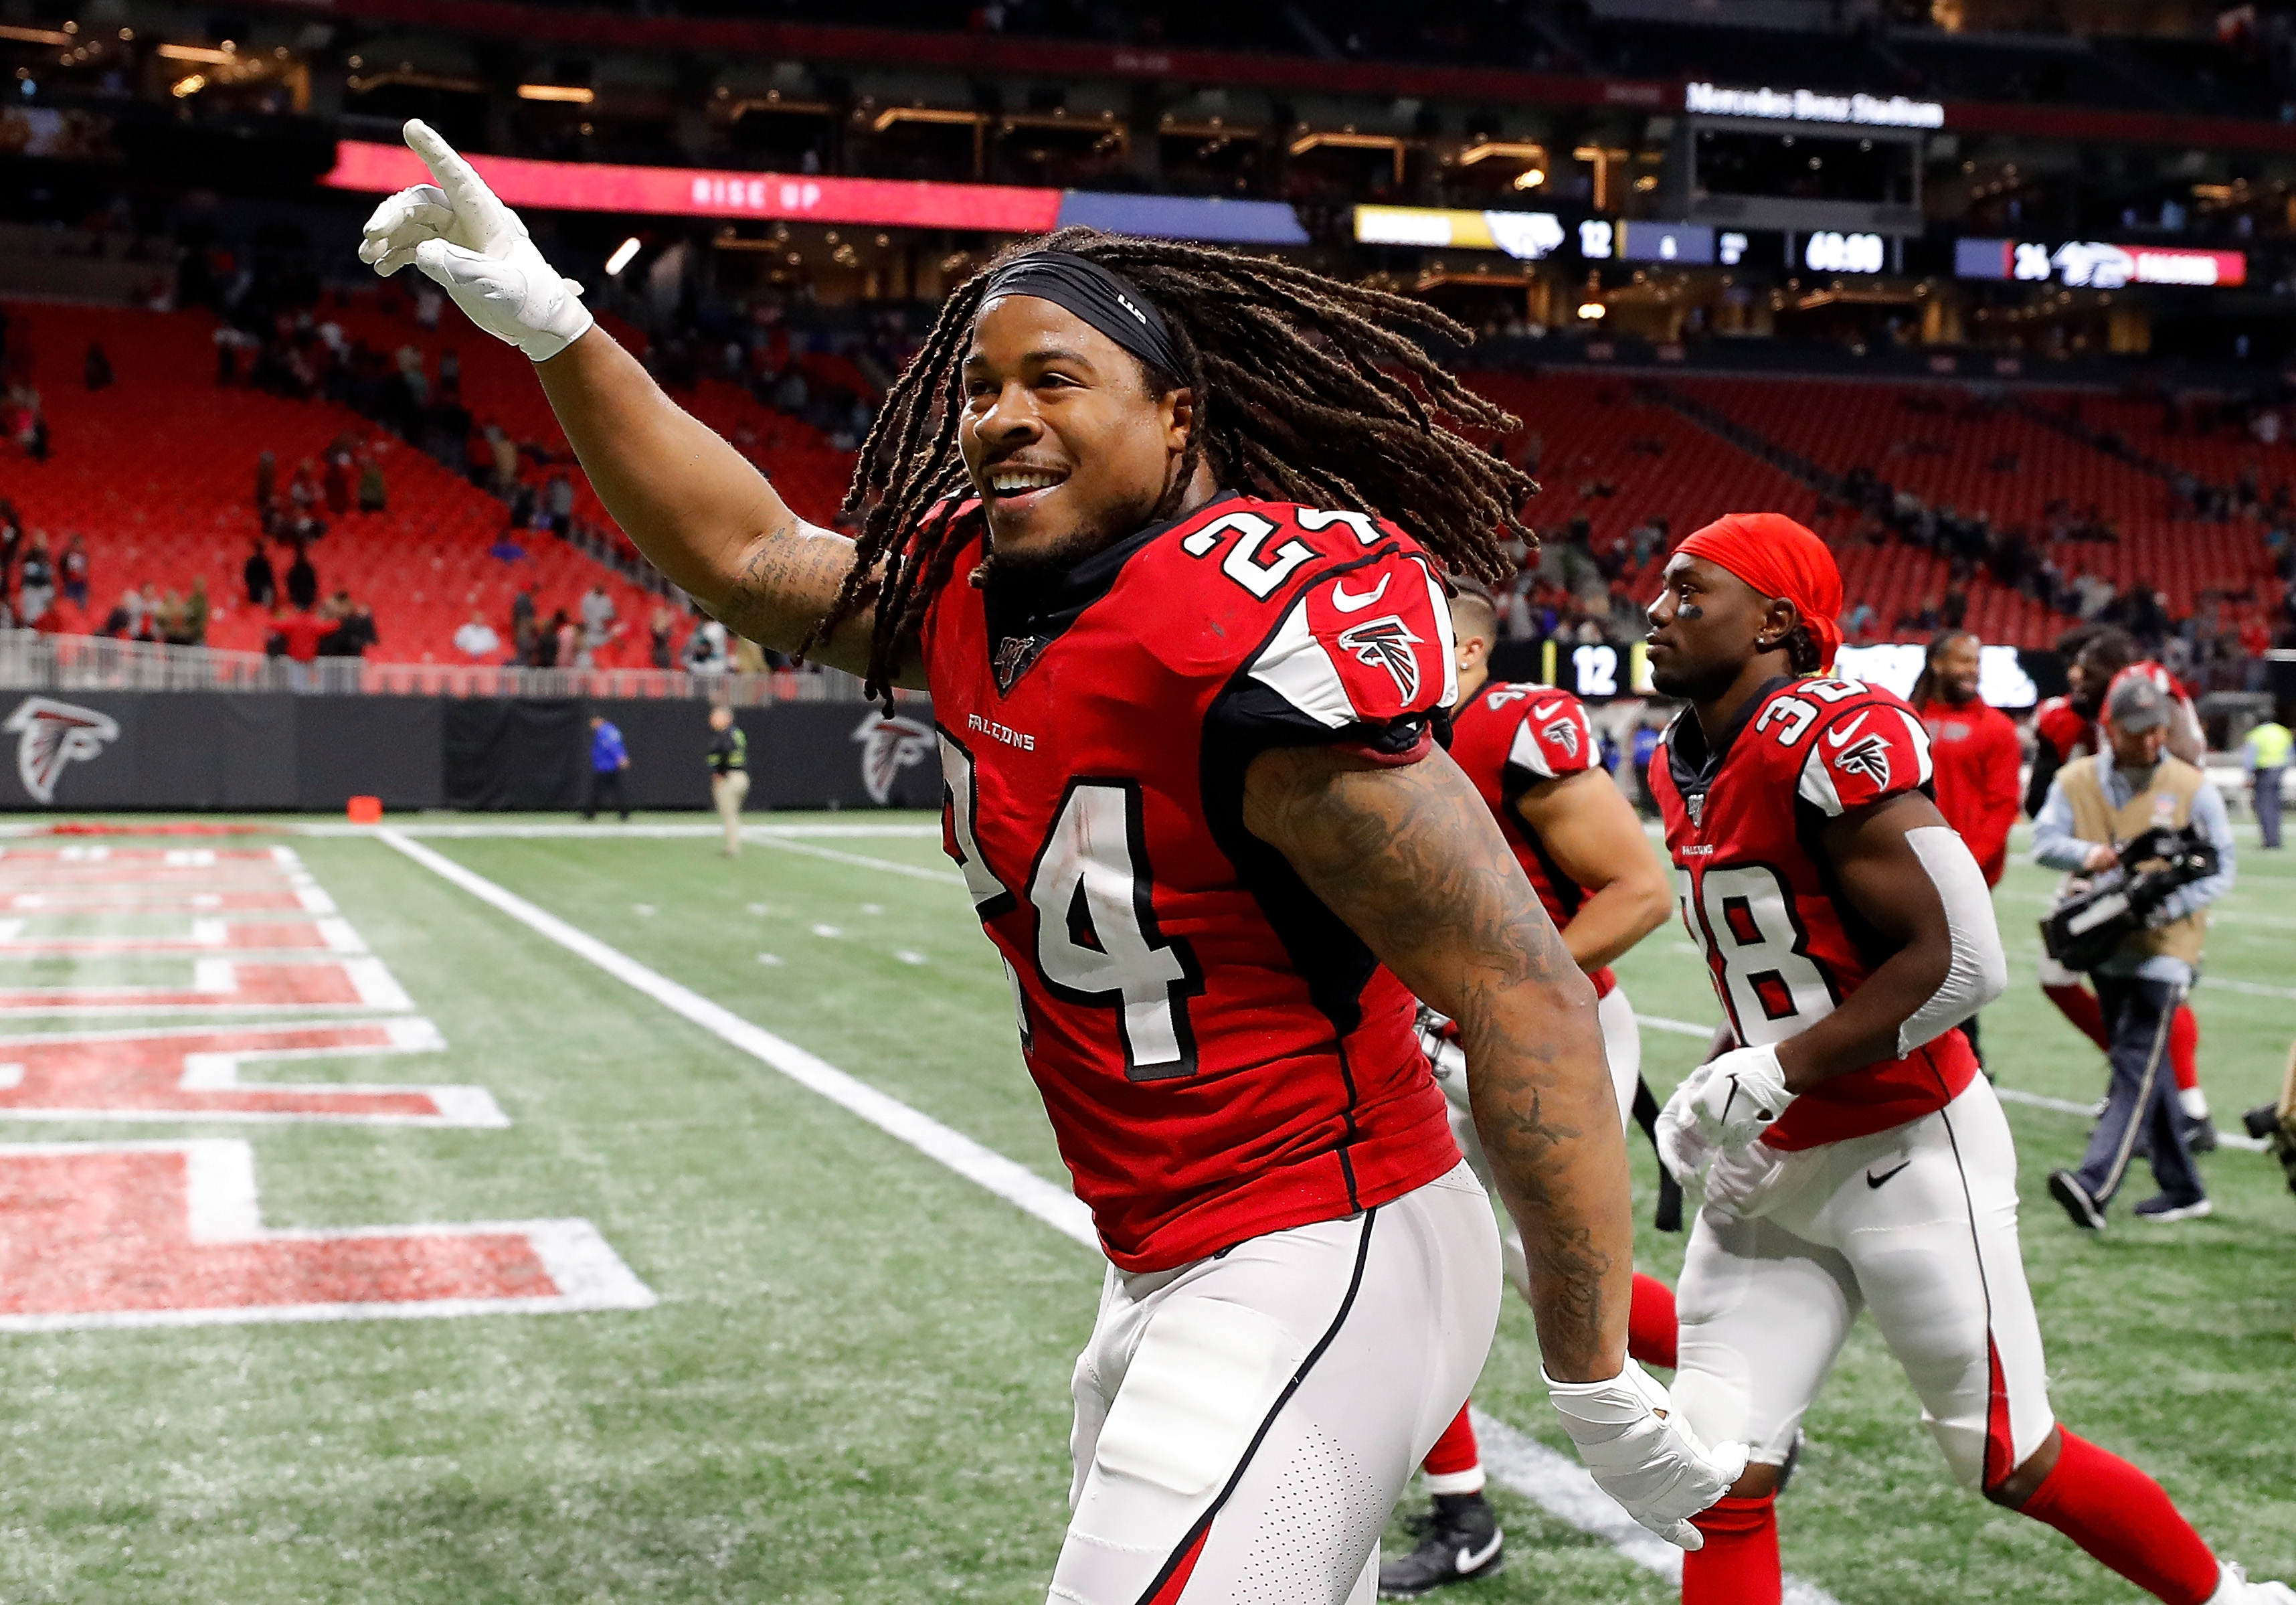 The NFL season is just two months away, and Devonta Freeman is still without a job. Where should the former Falcons RB land?